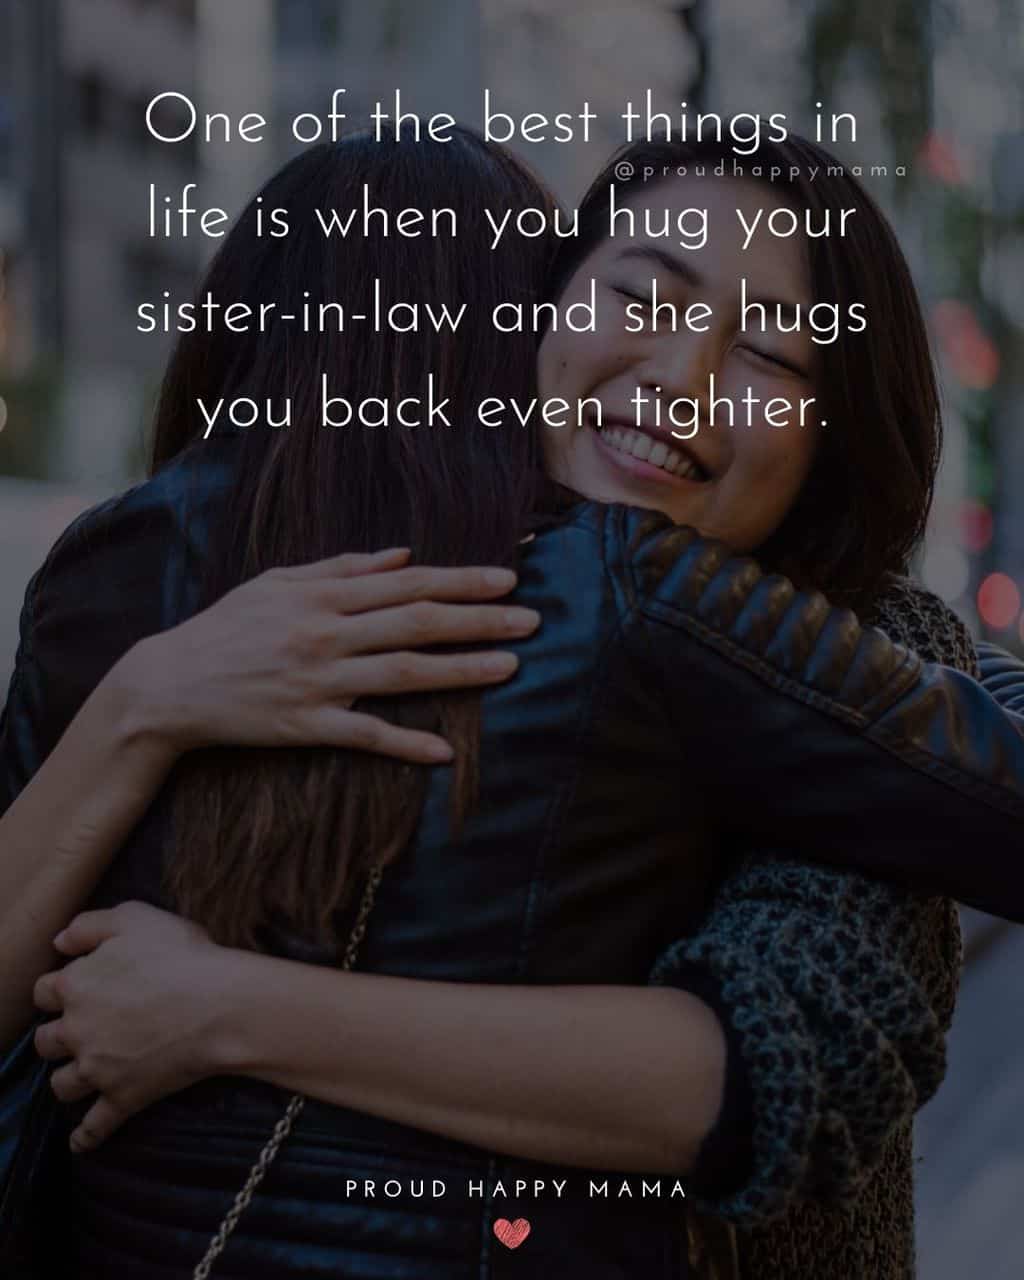 Sister In Law Quotes One Of The Best Things In Life Is When You Hug Your Sister In Law And She Hugs You Back Even Tighter. 